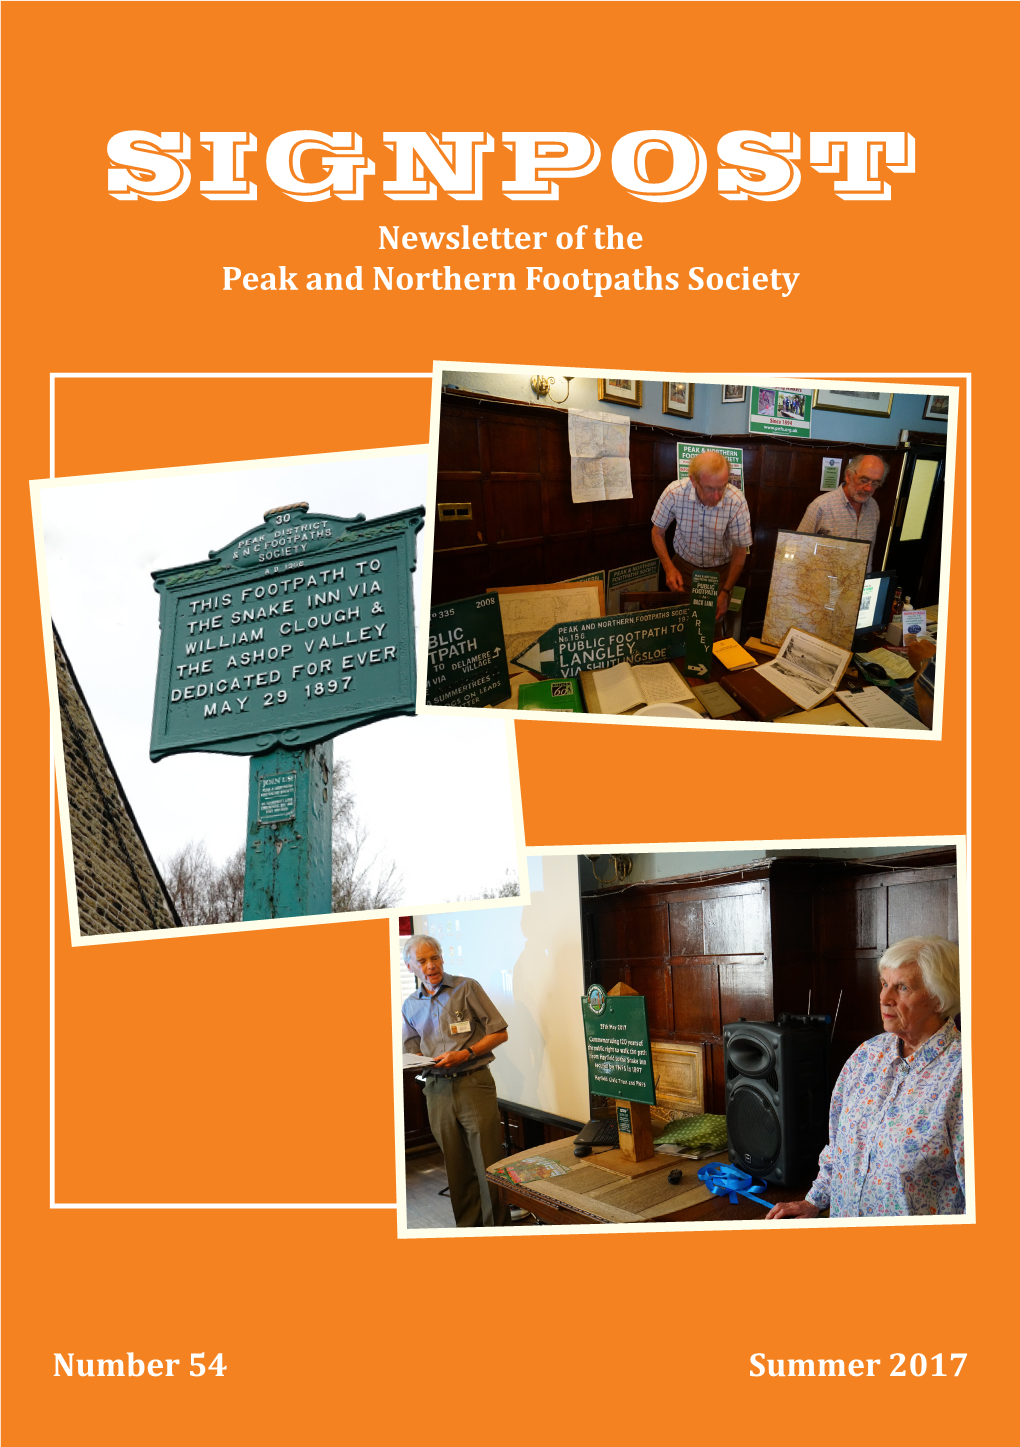 SIGNPOST Newsletter of the Peak and Northern Footpaths Society